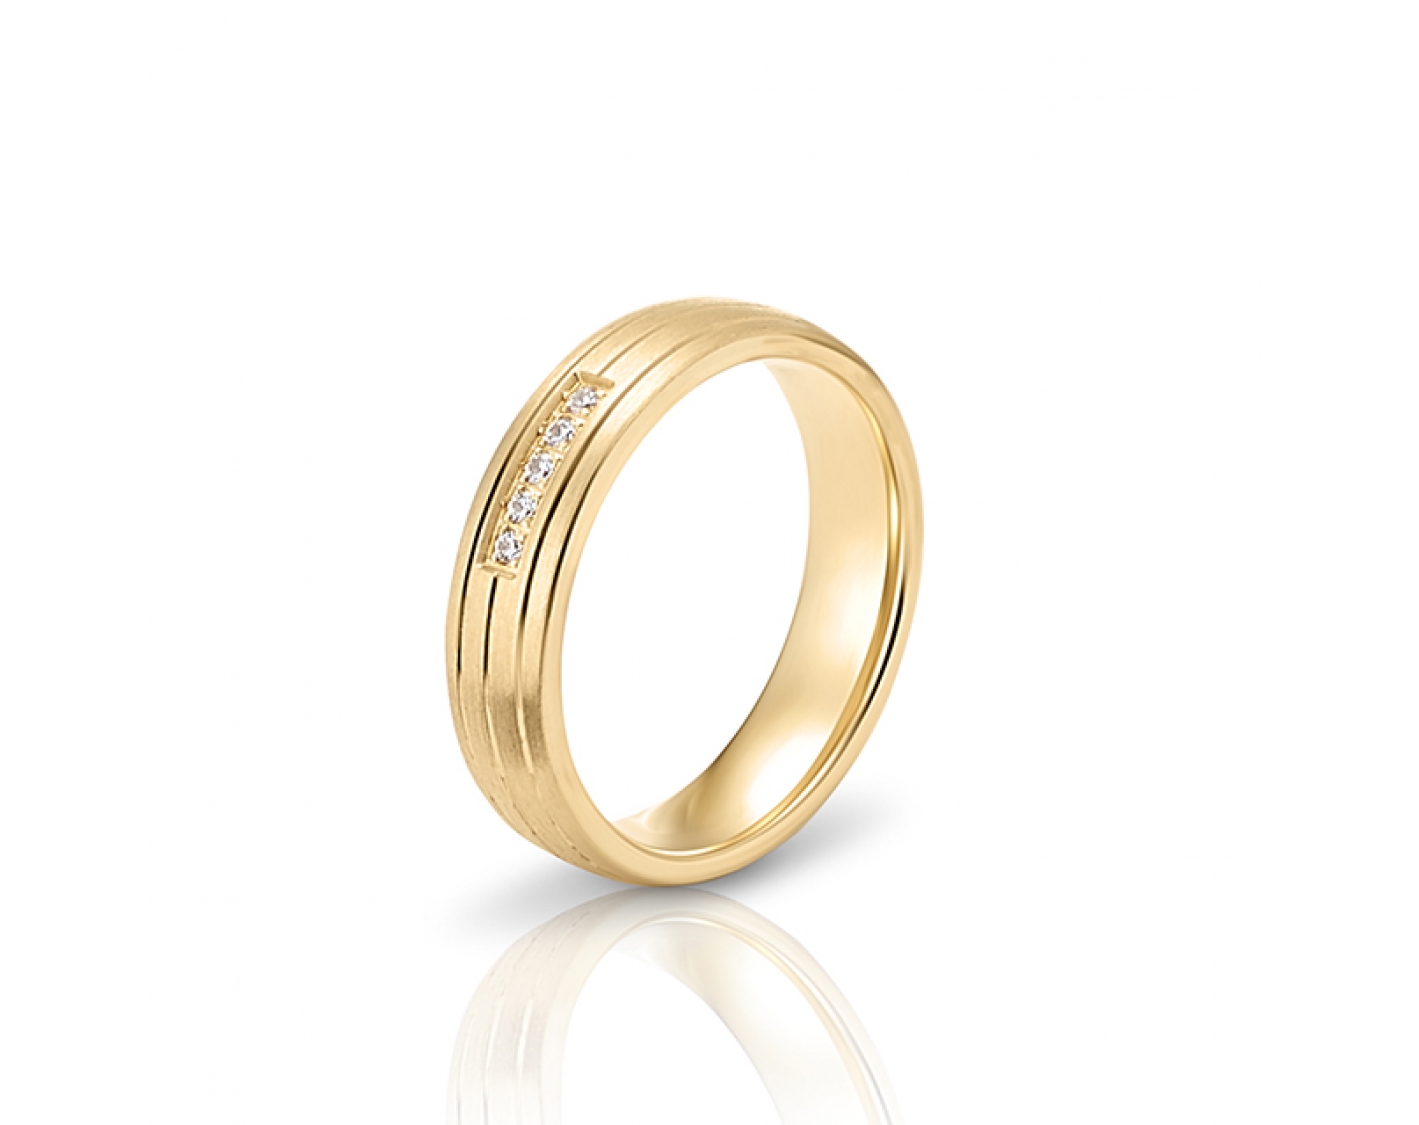 18k yellow gold 5mm matte wedding band with shiny inlays and diamonds Photos & images